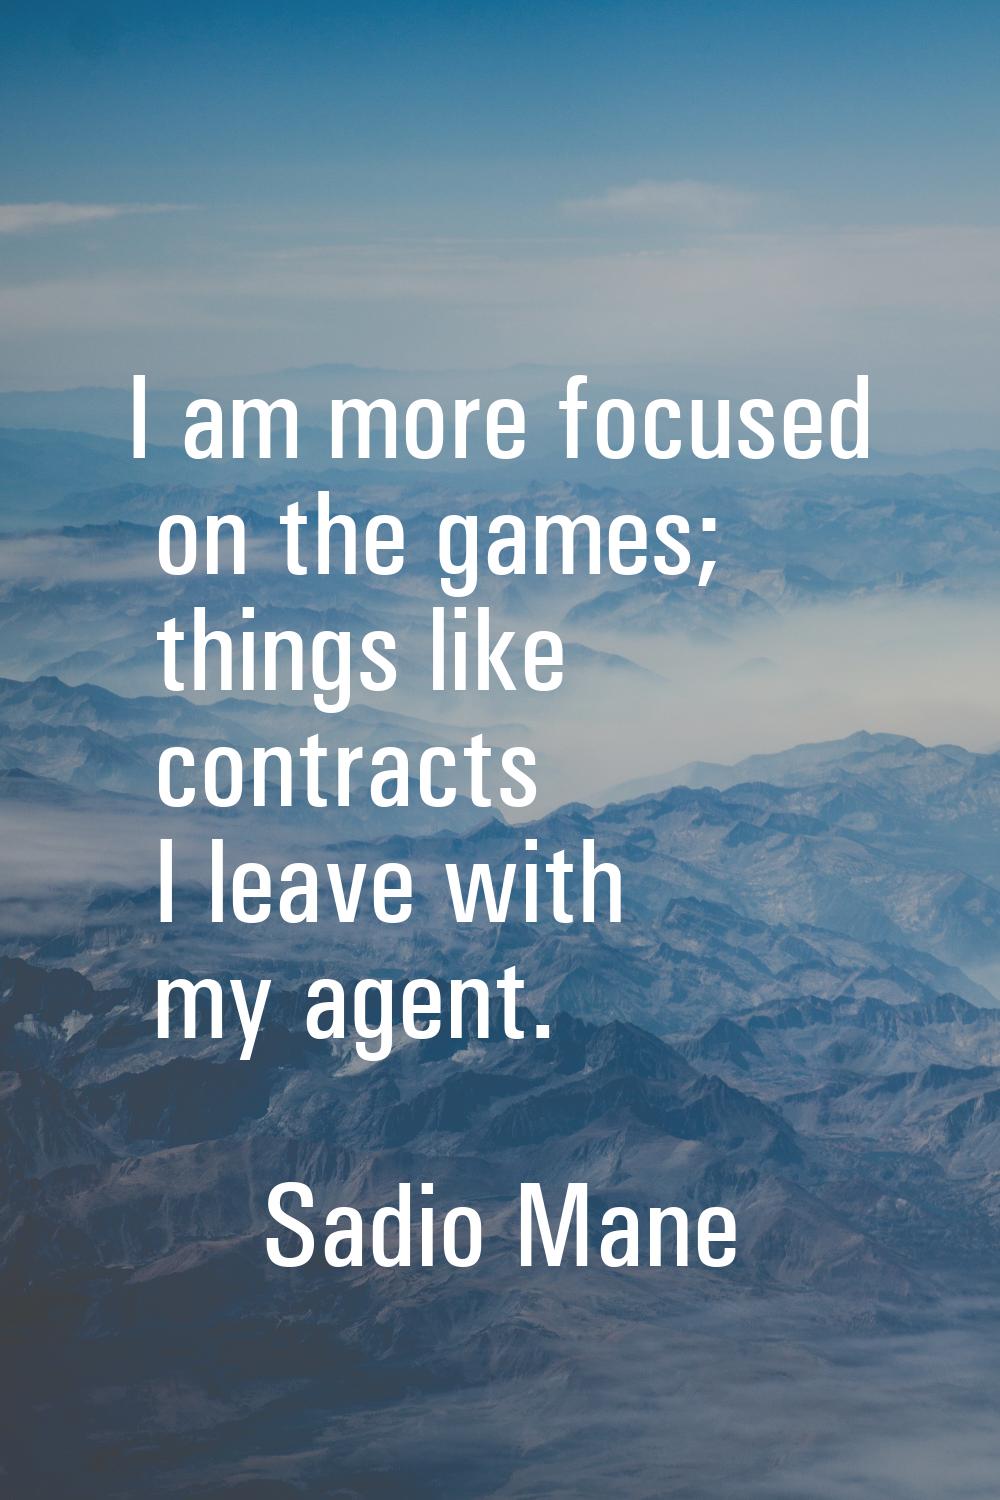 I am more focused on the games; things like contracts I leave with my agent.